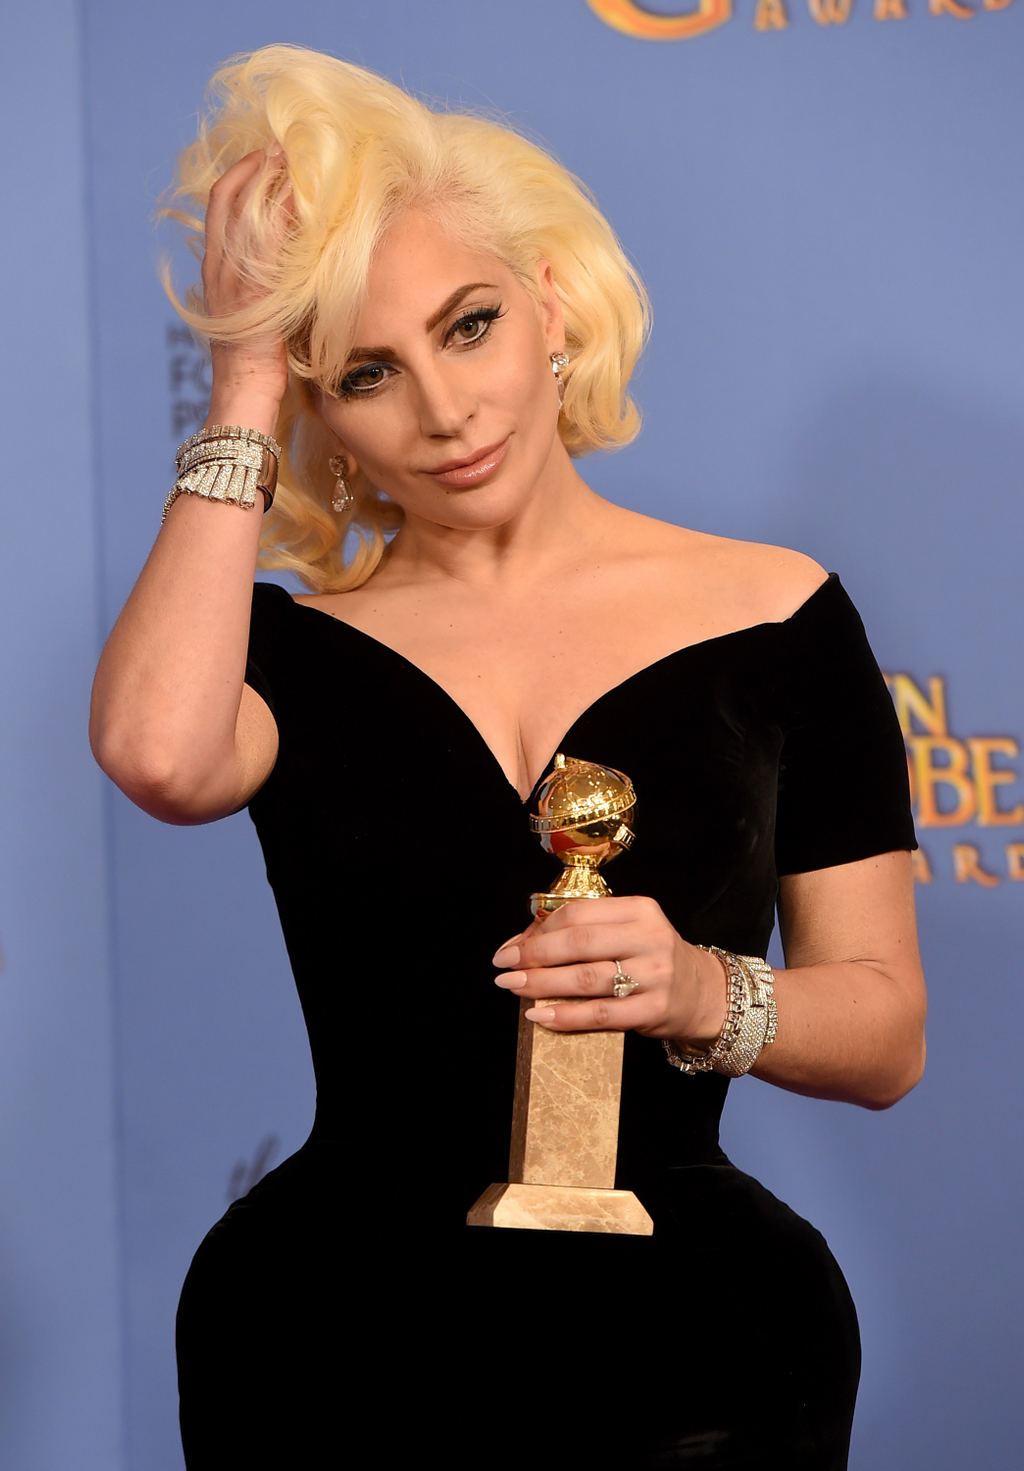 73rd Annual Golden Globe Awards - Press Room GettyImageRank1 VERTICAL USA California Beverly Hills - California SINGER Award Winning Press Room Television Show Golden Globe Awards PORTRAIT Photography Film Industry Arts Culture and Entertainment Celebriti